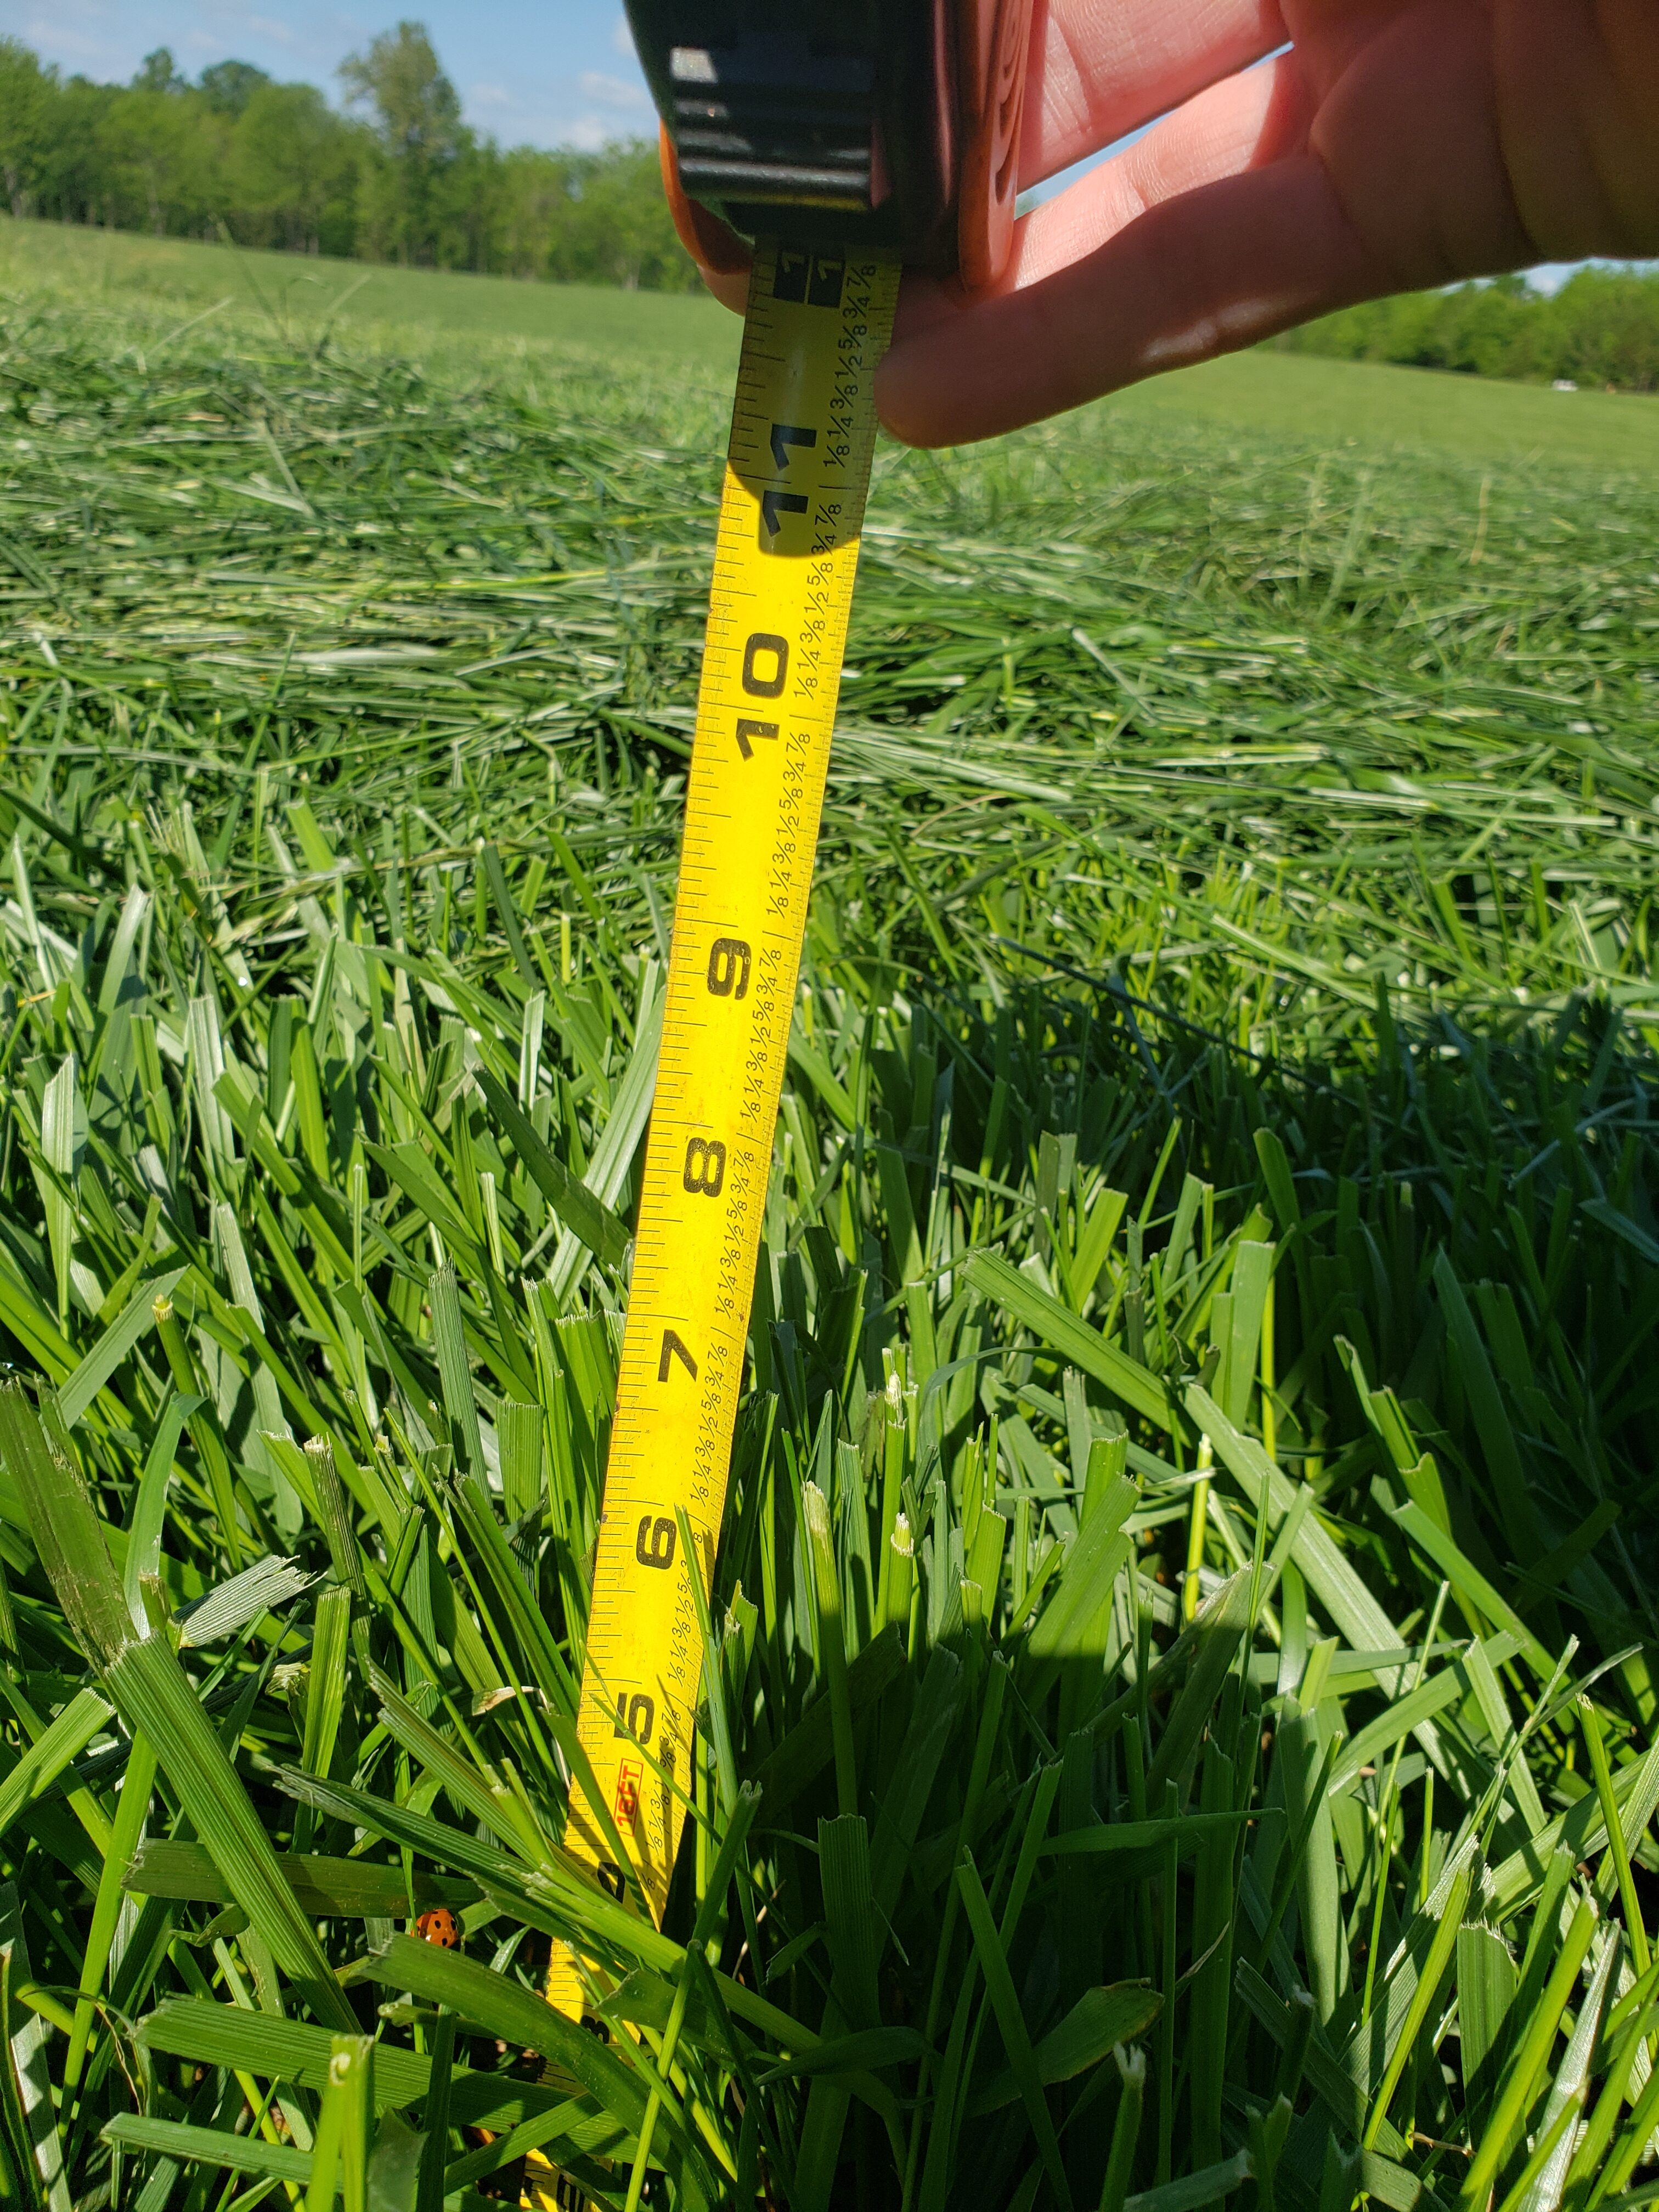 Yellow ruler in green hay field indicating grass is 6 inches tall.